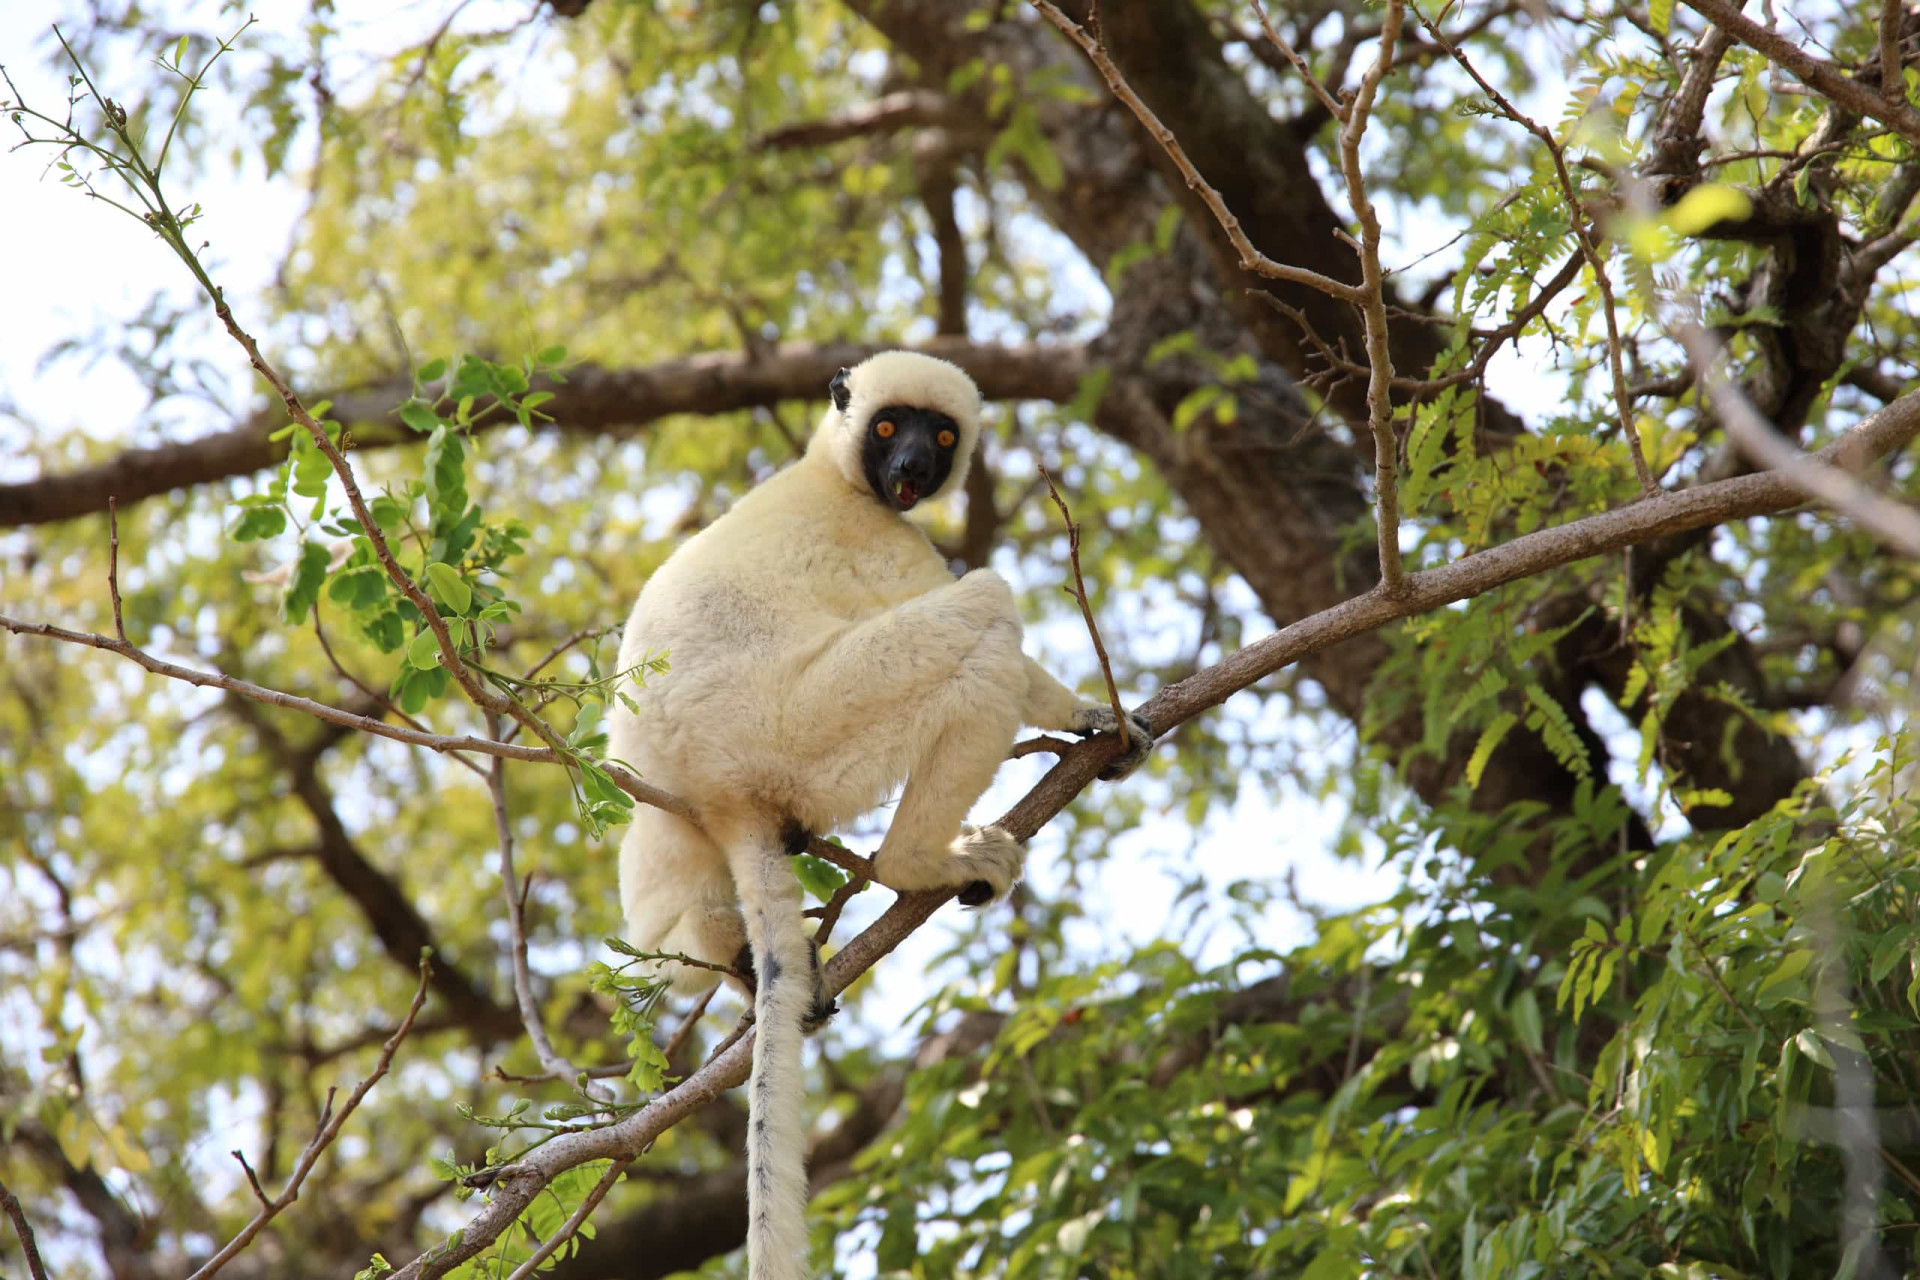 <p>The silky sifaka is one of the rarest mammals on earth. It's found in a few protected areas in the rain forests of northeastern Madagascar.</p><p>You may also like:<a href="https://www.starsinsider.com/n/235884?utm_source=msn.com&utm_medium=display&utm_campaign=referral_description&utm_content=265328v11en-us"> Australia's mythical creatures</a></p>